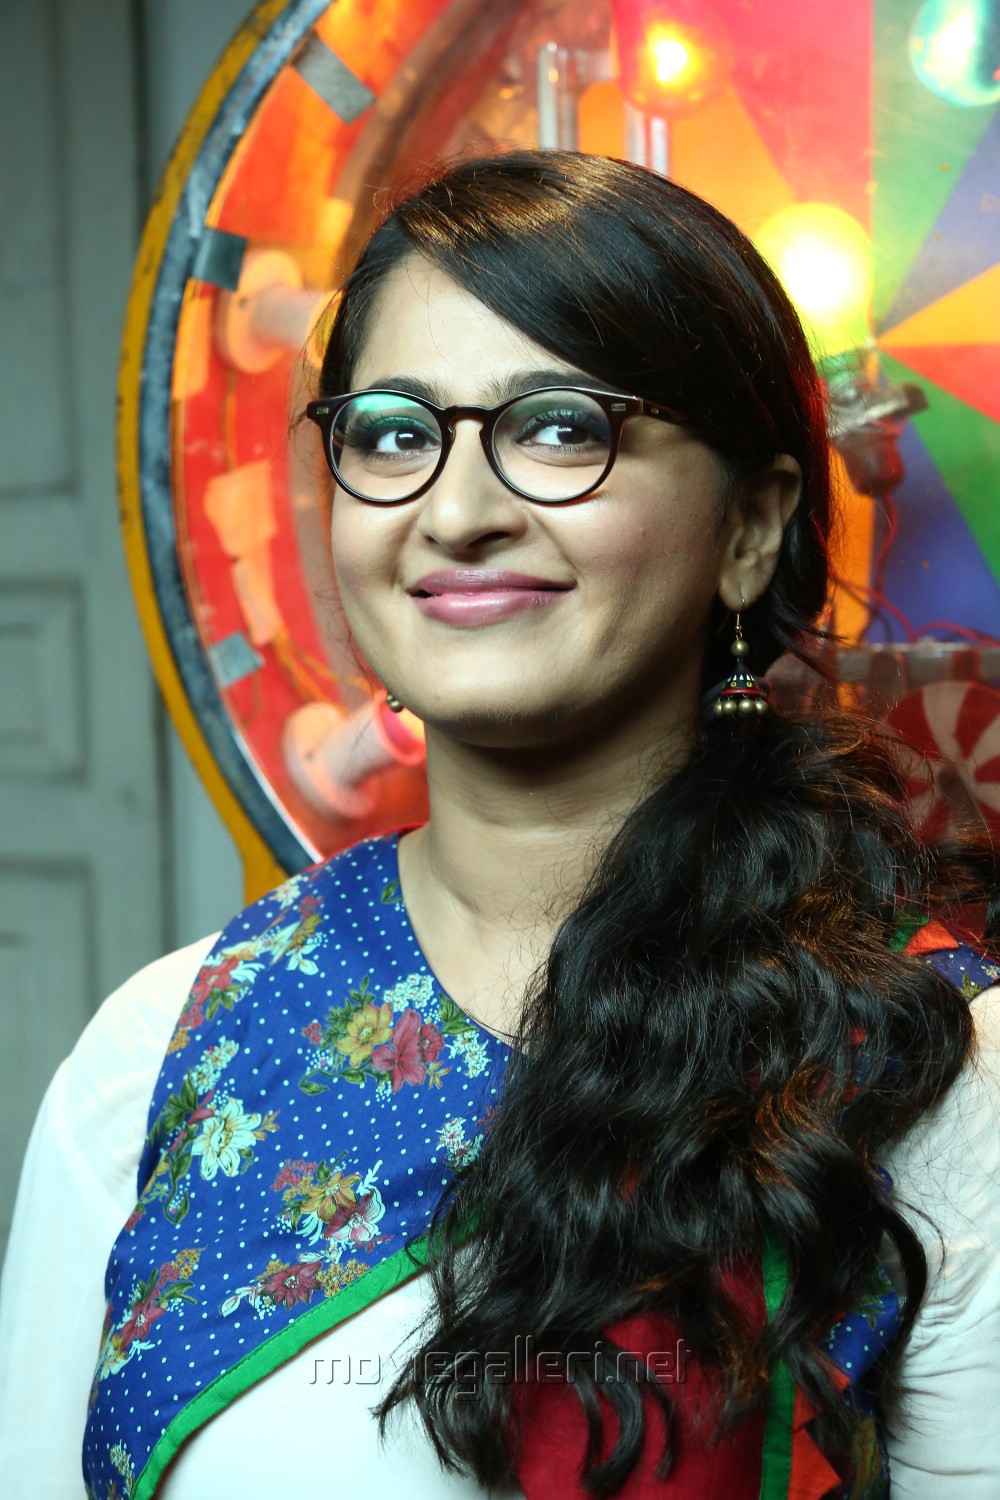 Size Zero Actress Anushka Shetty Images New Movie Posters Sweety shetty (born 7 november 1981), known by her stage name anushka shetty, is an indian actress and model who predominantly works in telugu and tamil films. size zero actress anushka shetty images